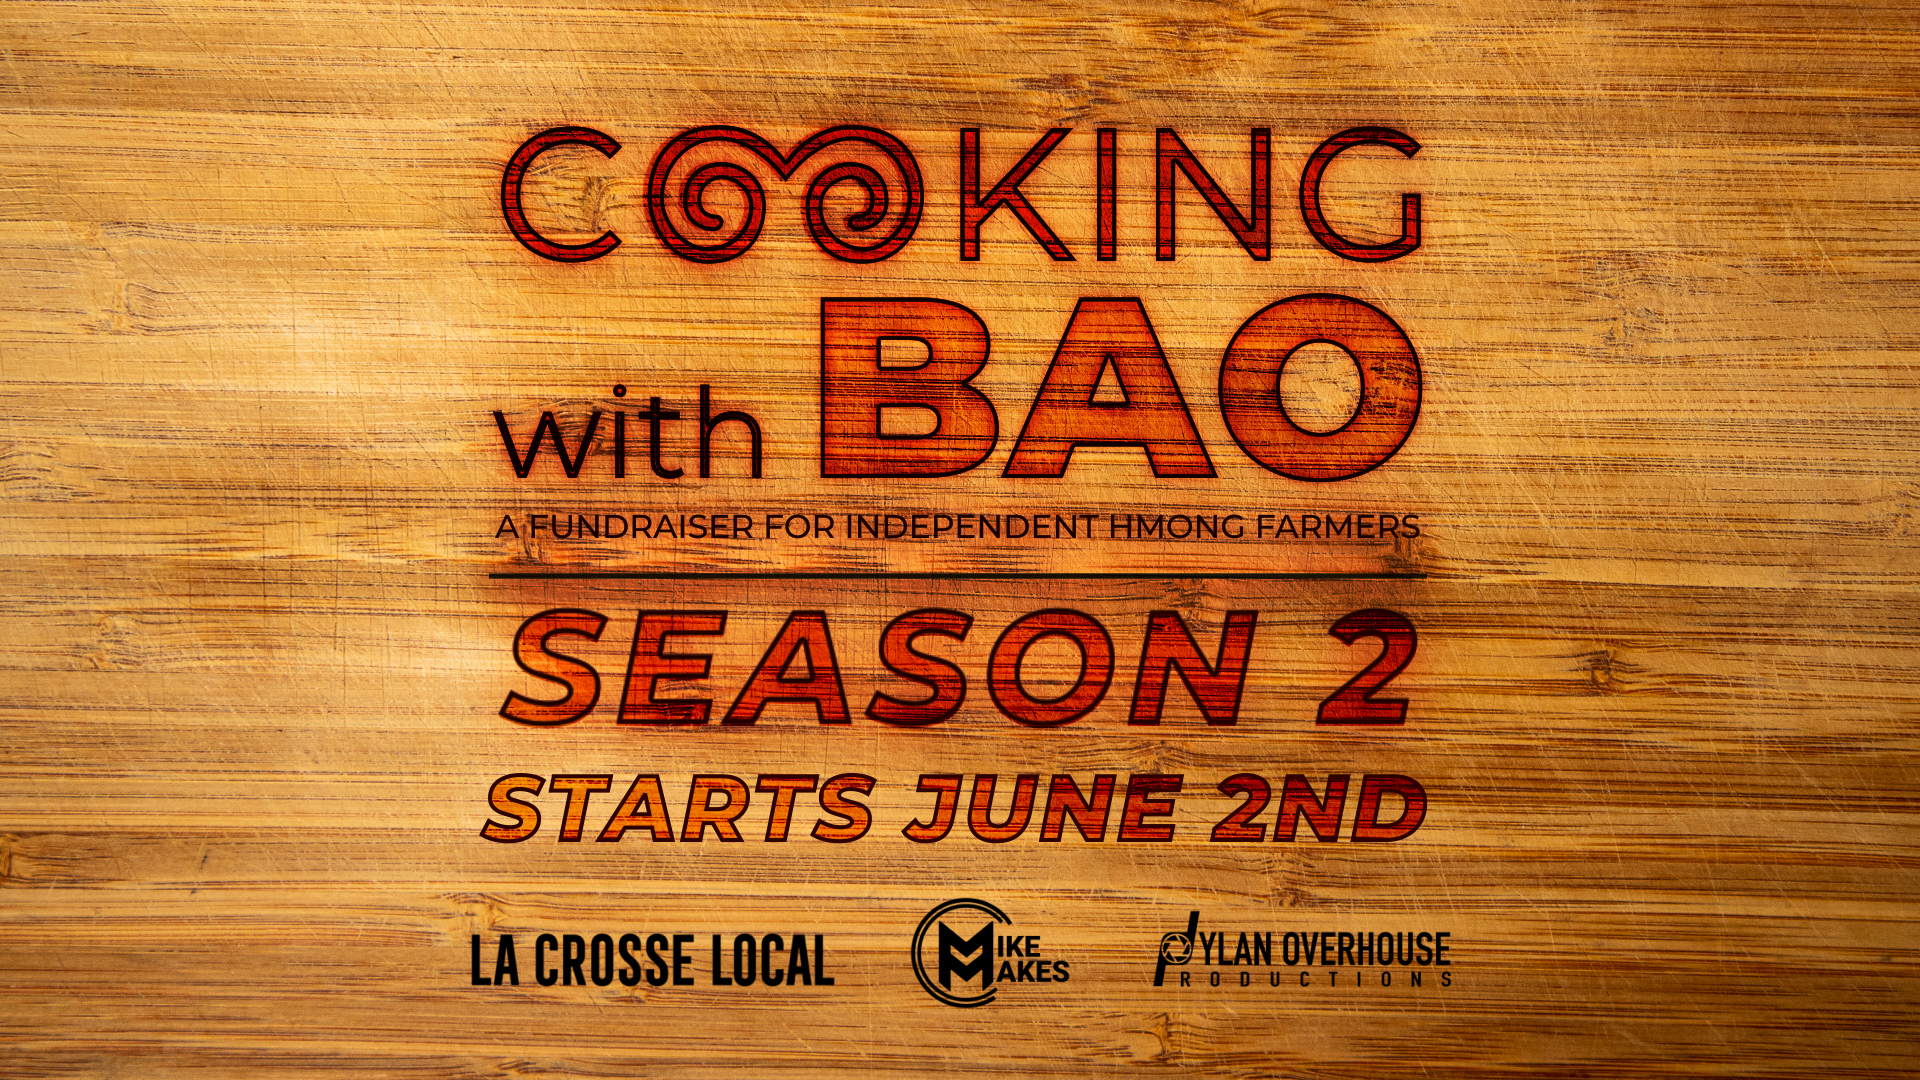 The limited series cooking show “Cooking with Bao'' will be kicking off Season 2 Thursday, June 2 at 3:30pm with special guests.